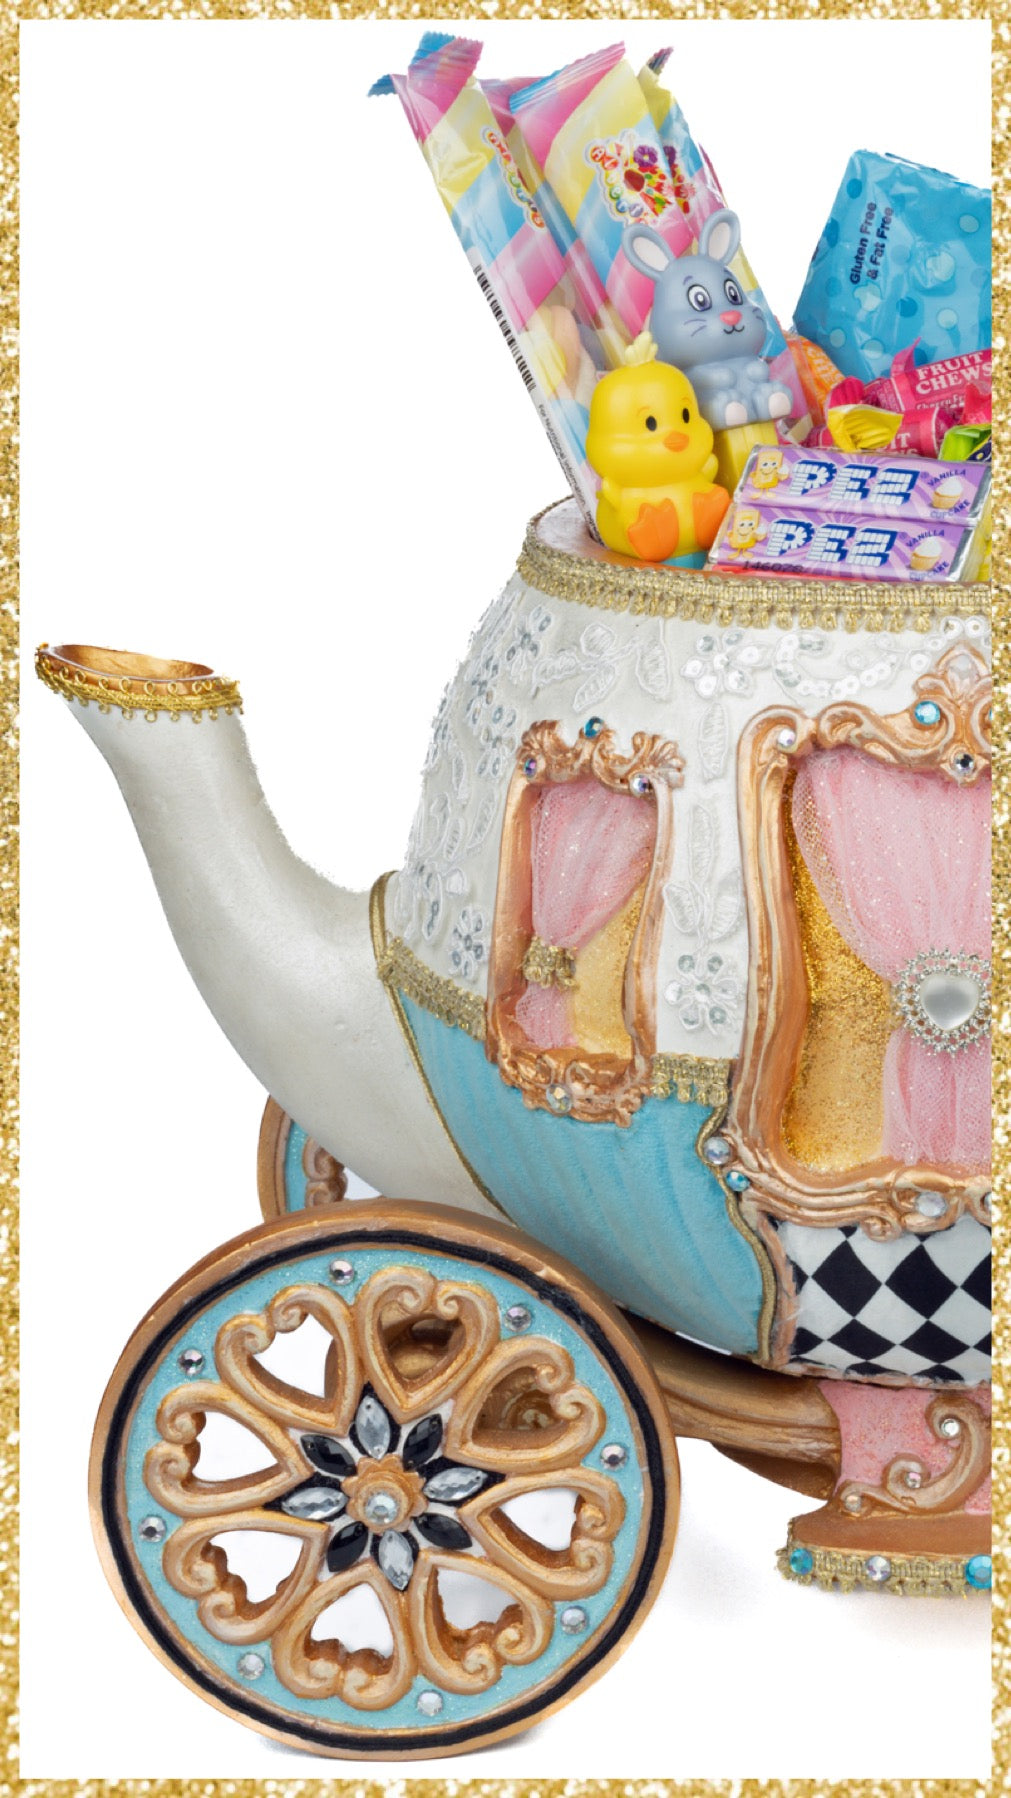 Katherine's Collection Teapot Carriage Candy Bowl    Katherine's Collection Hearts and Wonderland